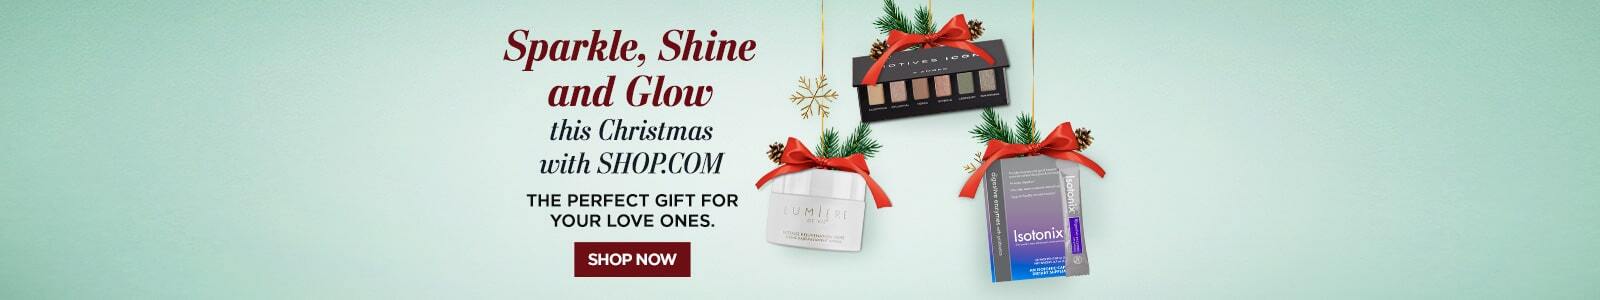 Sparkle, Shine, and Glow this Christmas with Shop.com The perfect gift for your love ones. Shop now